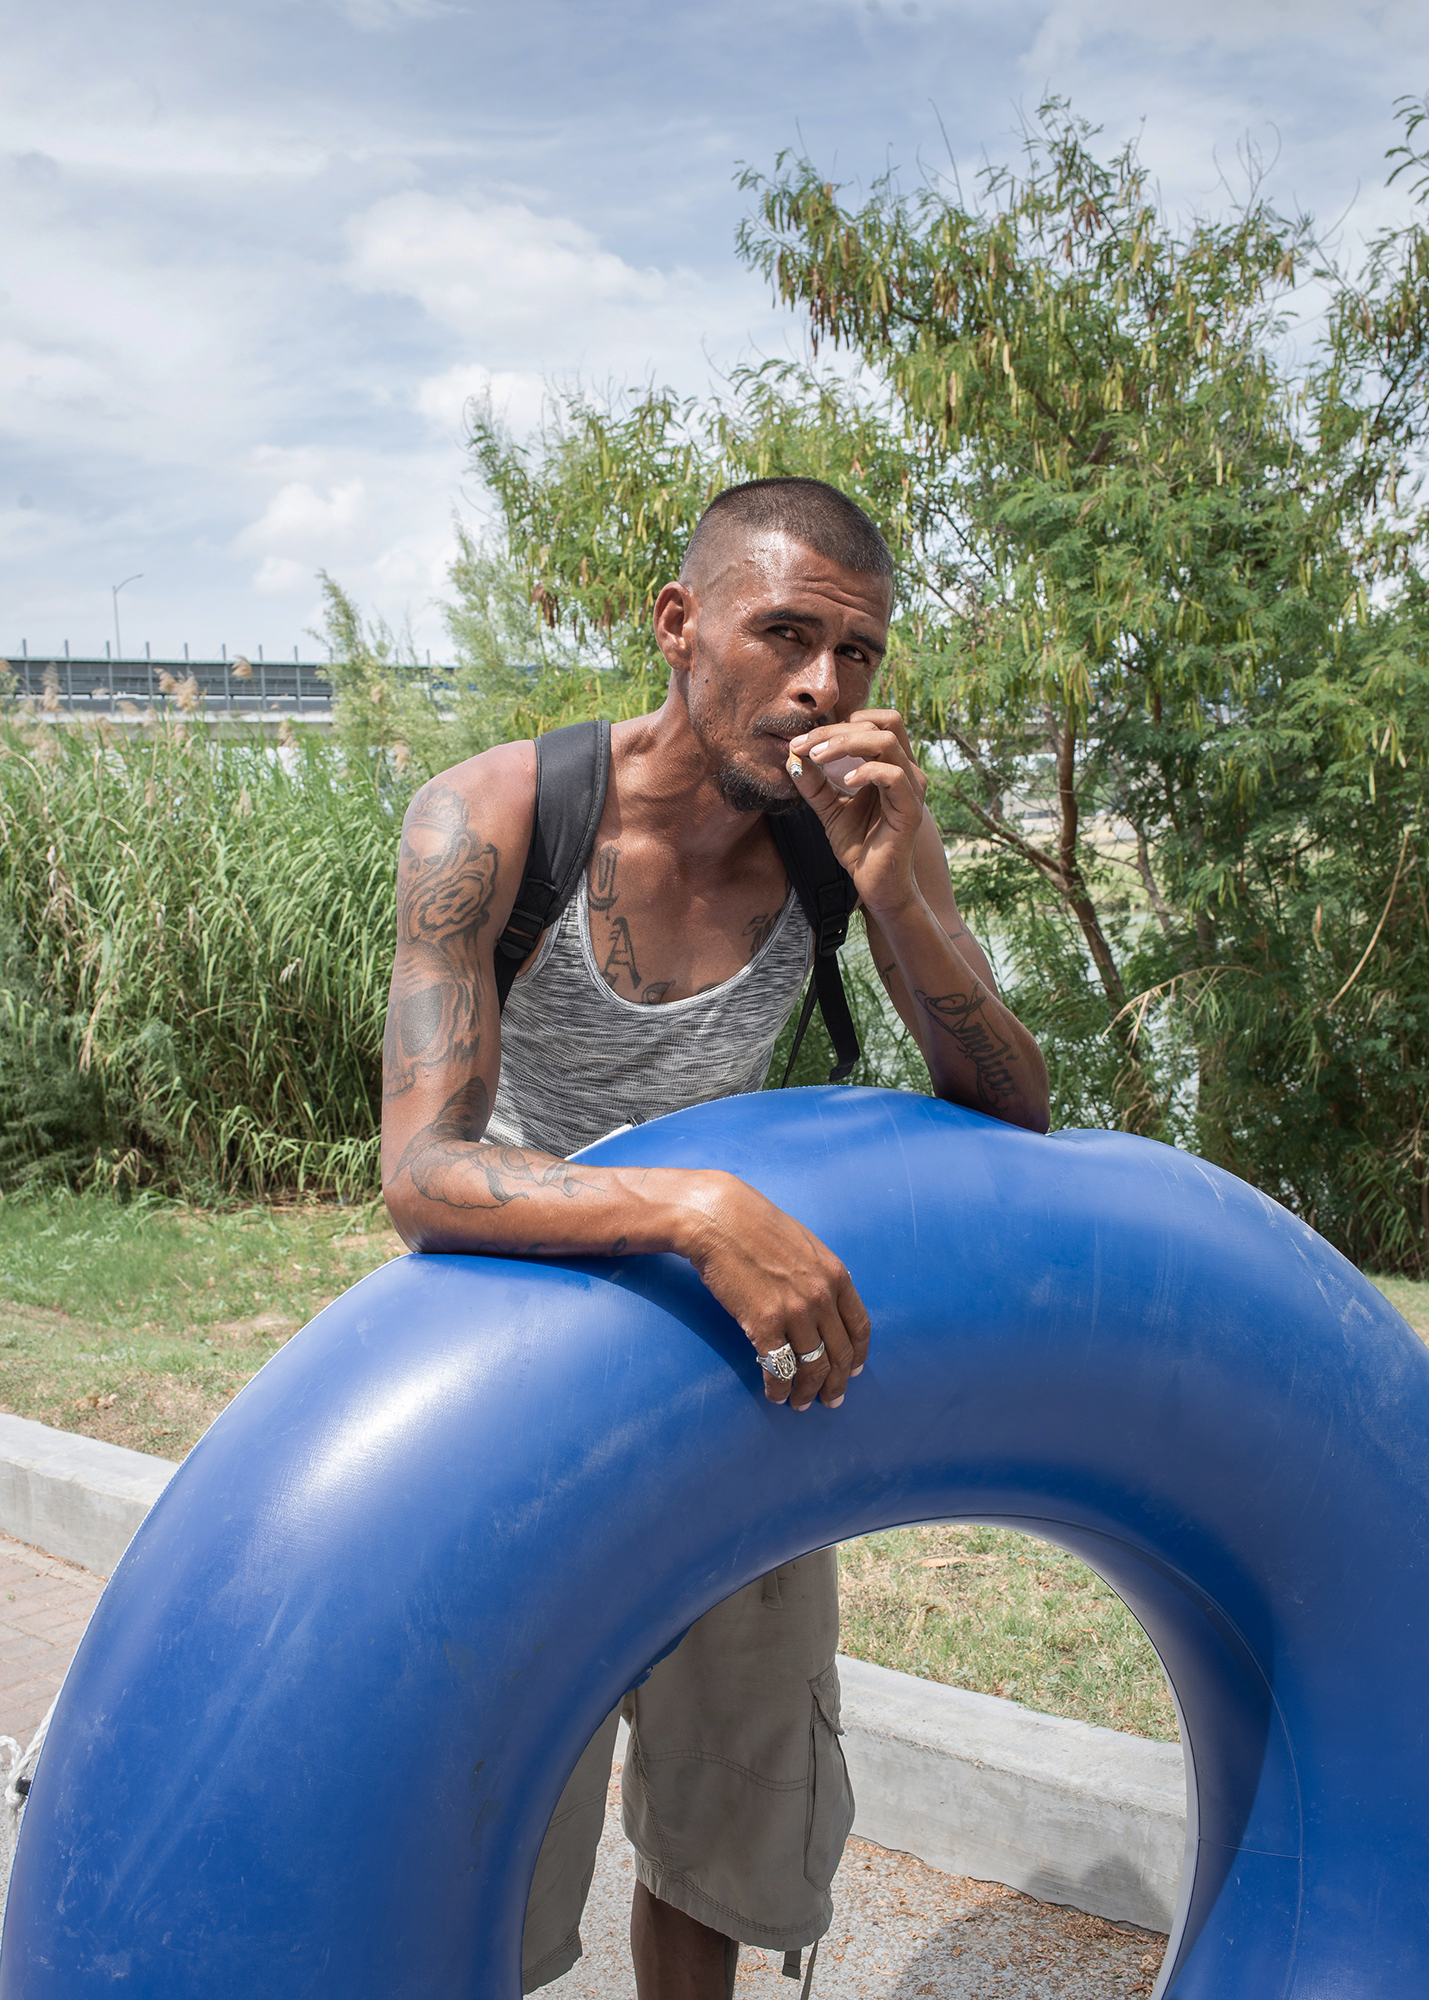  Portrait of Manuel, who affirms to be willing to cross the river with his inner tube. This person is most likely a "Coyote" (someone who charges for helping migrants cross). Rio Grande is known for being a natural border between Mexico and the Unite